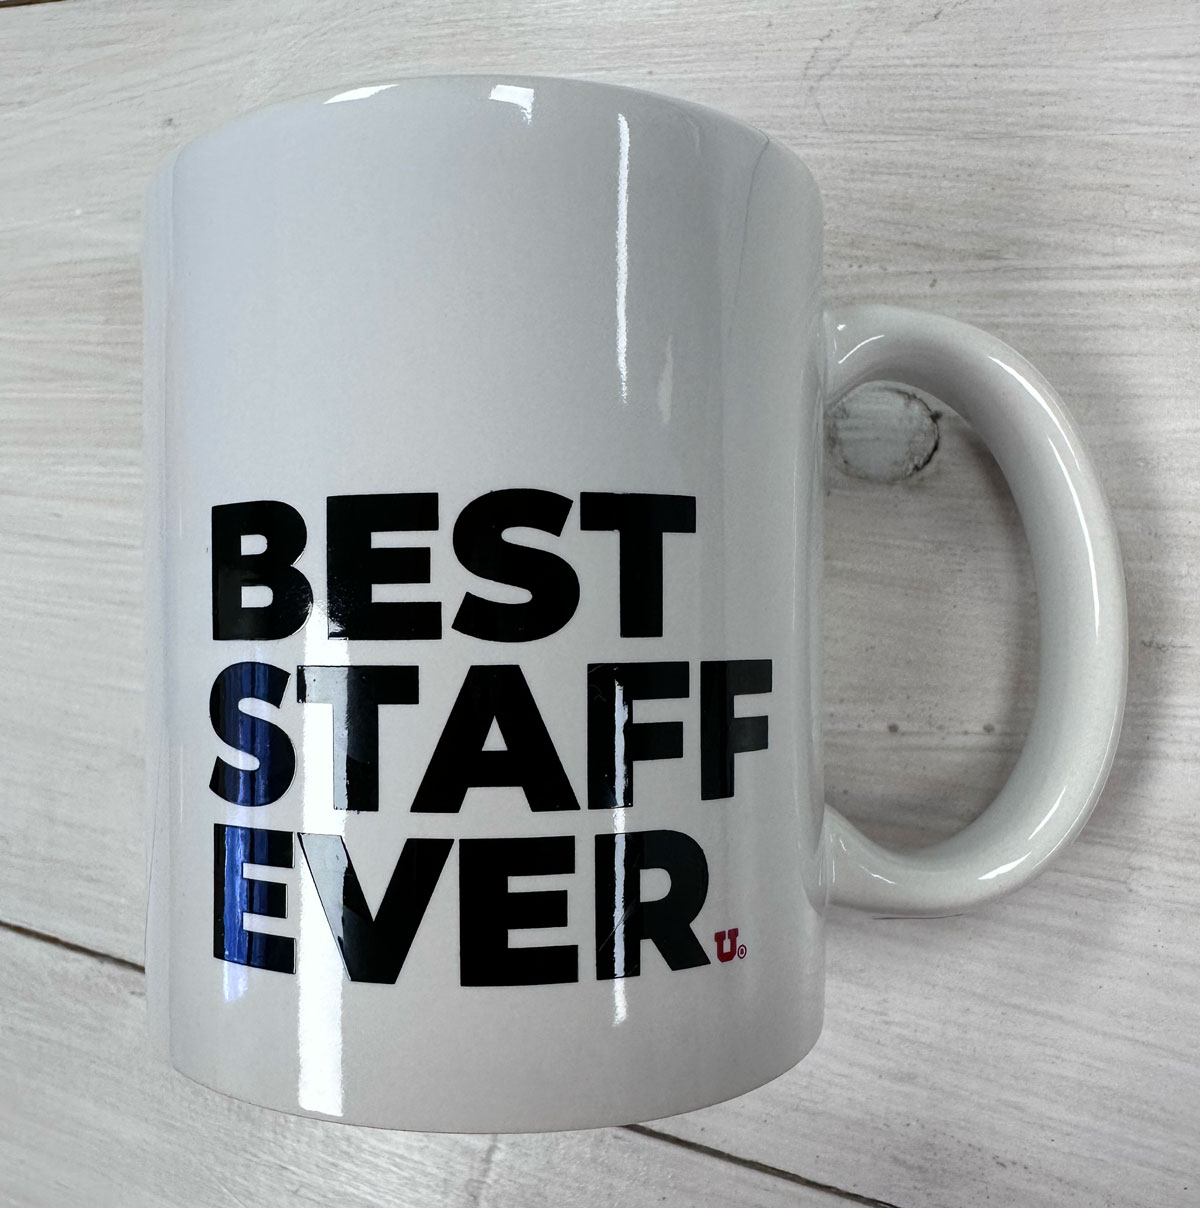 BEST STAFF EVER Mug (filled with treats)